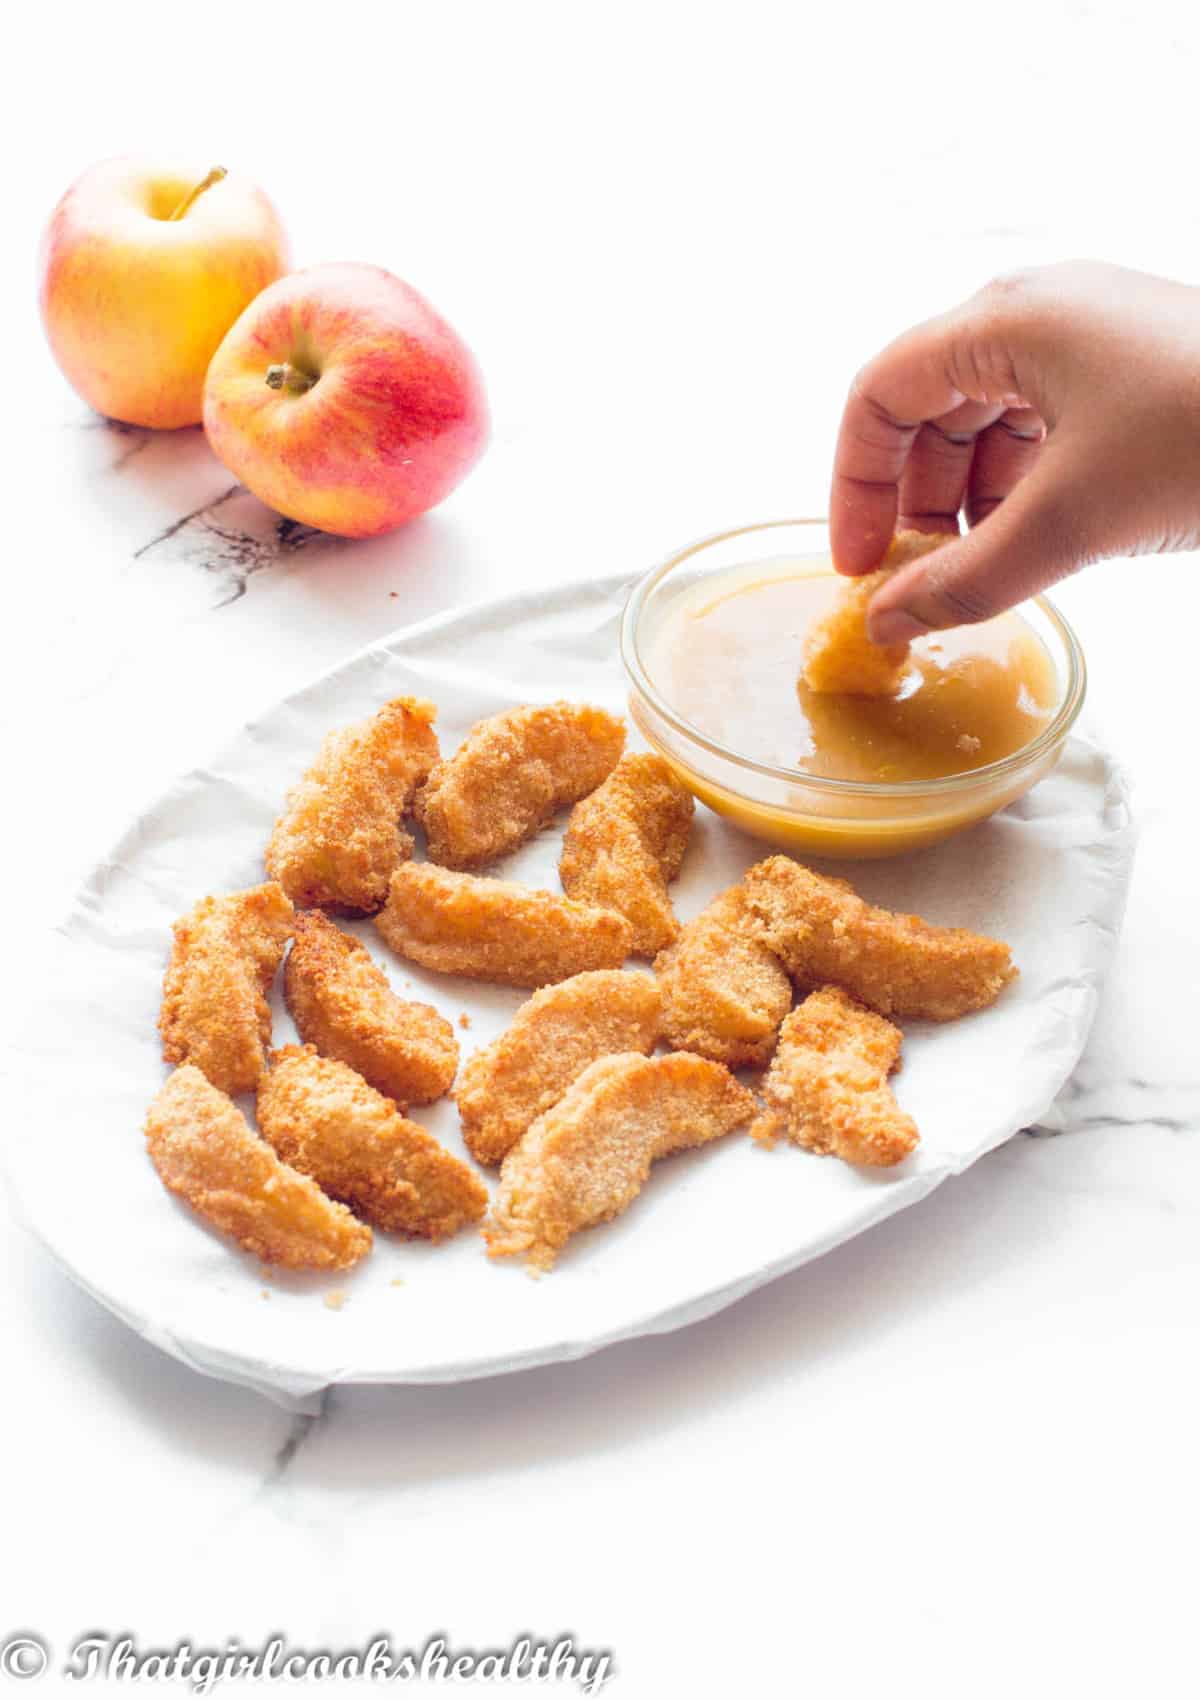 Dipping apple wedge into sauce